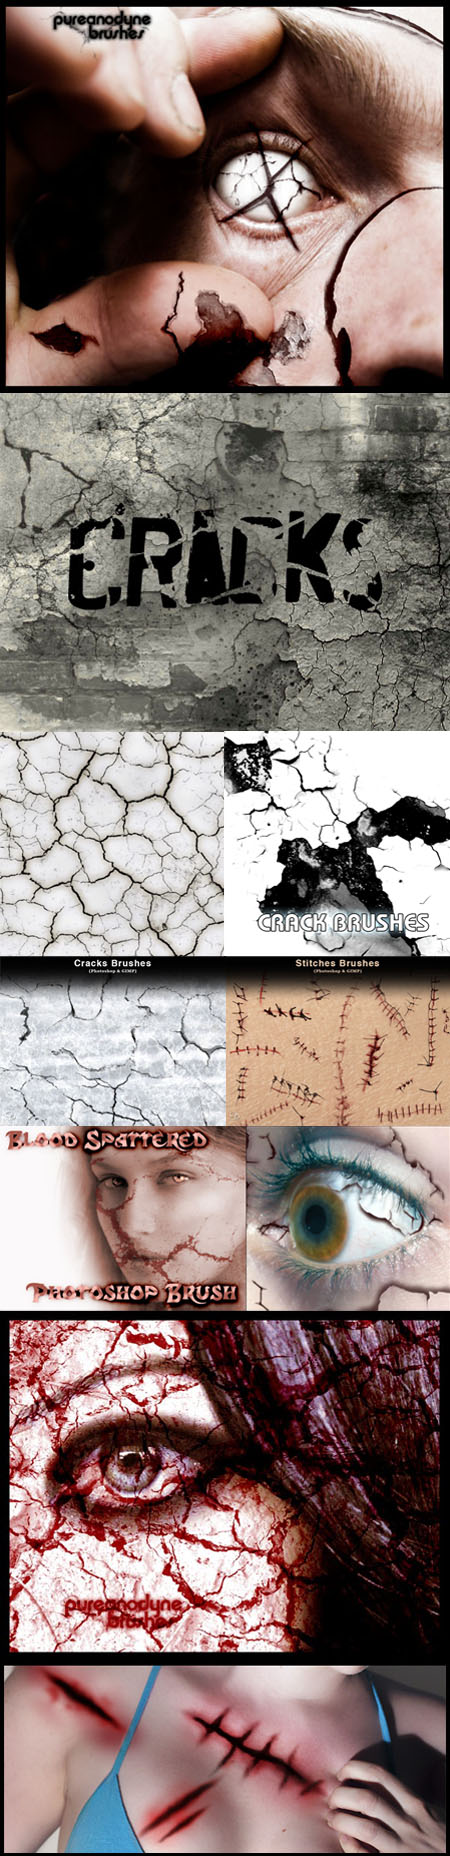 Cracks, Decay, Stitches and Sutures Brushes for Photoshop 1